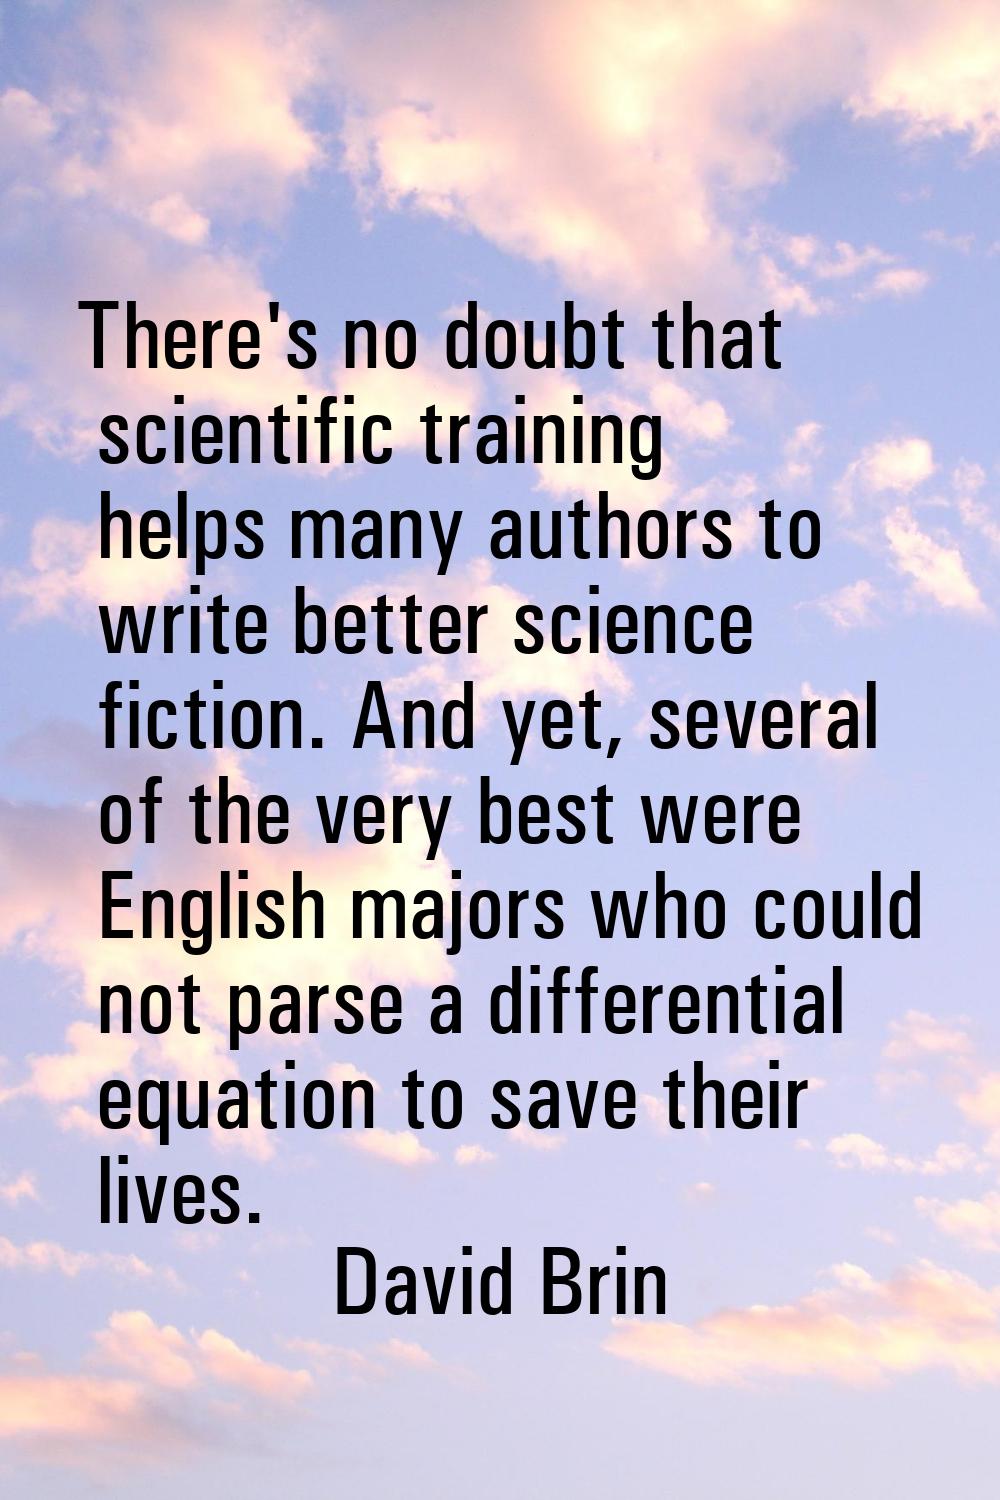 There's no doubt that scientific training helps many authors to write better science fiction. And y